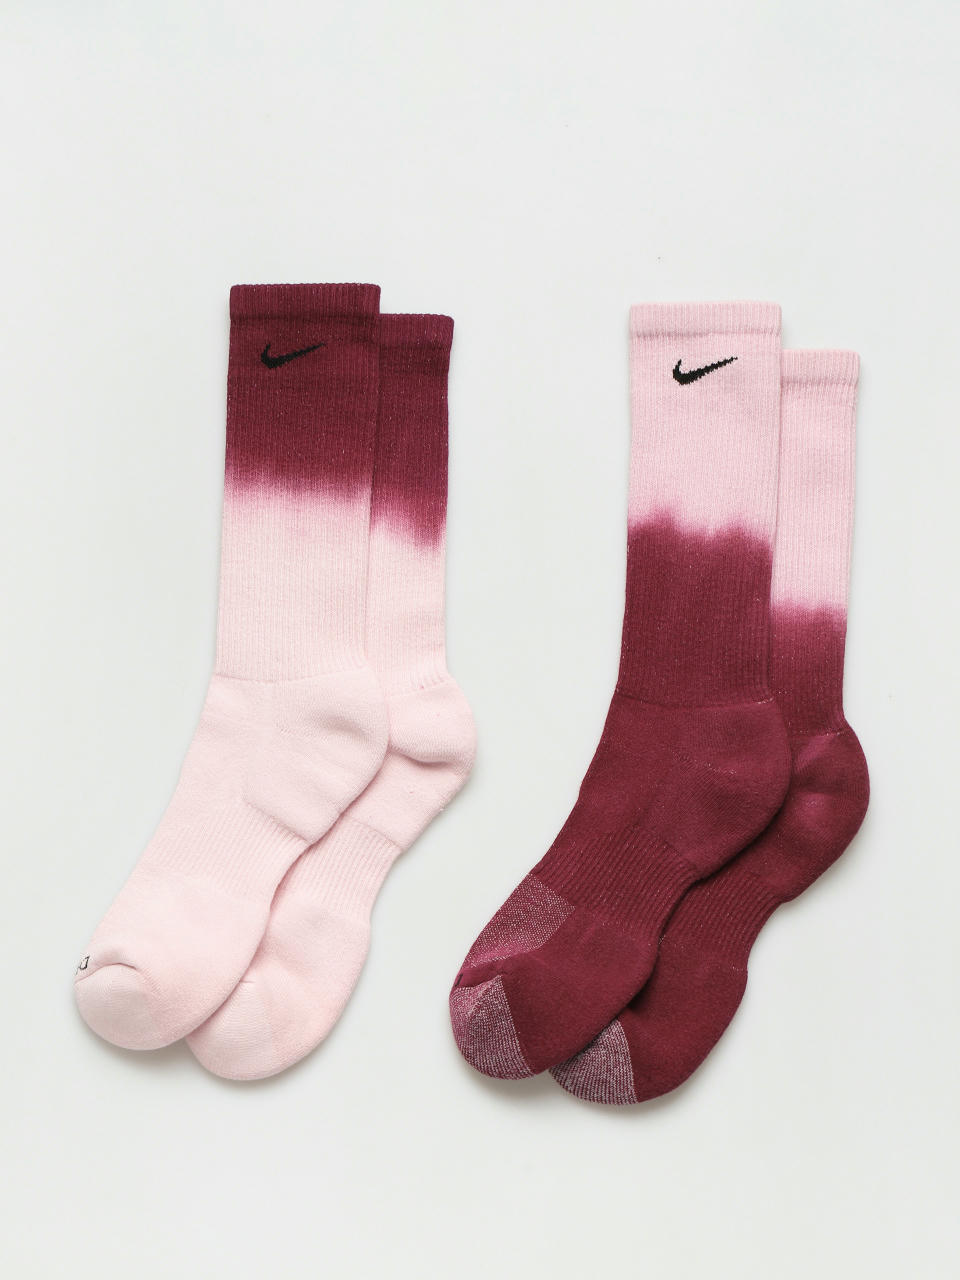 Chaussettes Nike SB - Everyday Tie Dye 2pack (Multi-color)